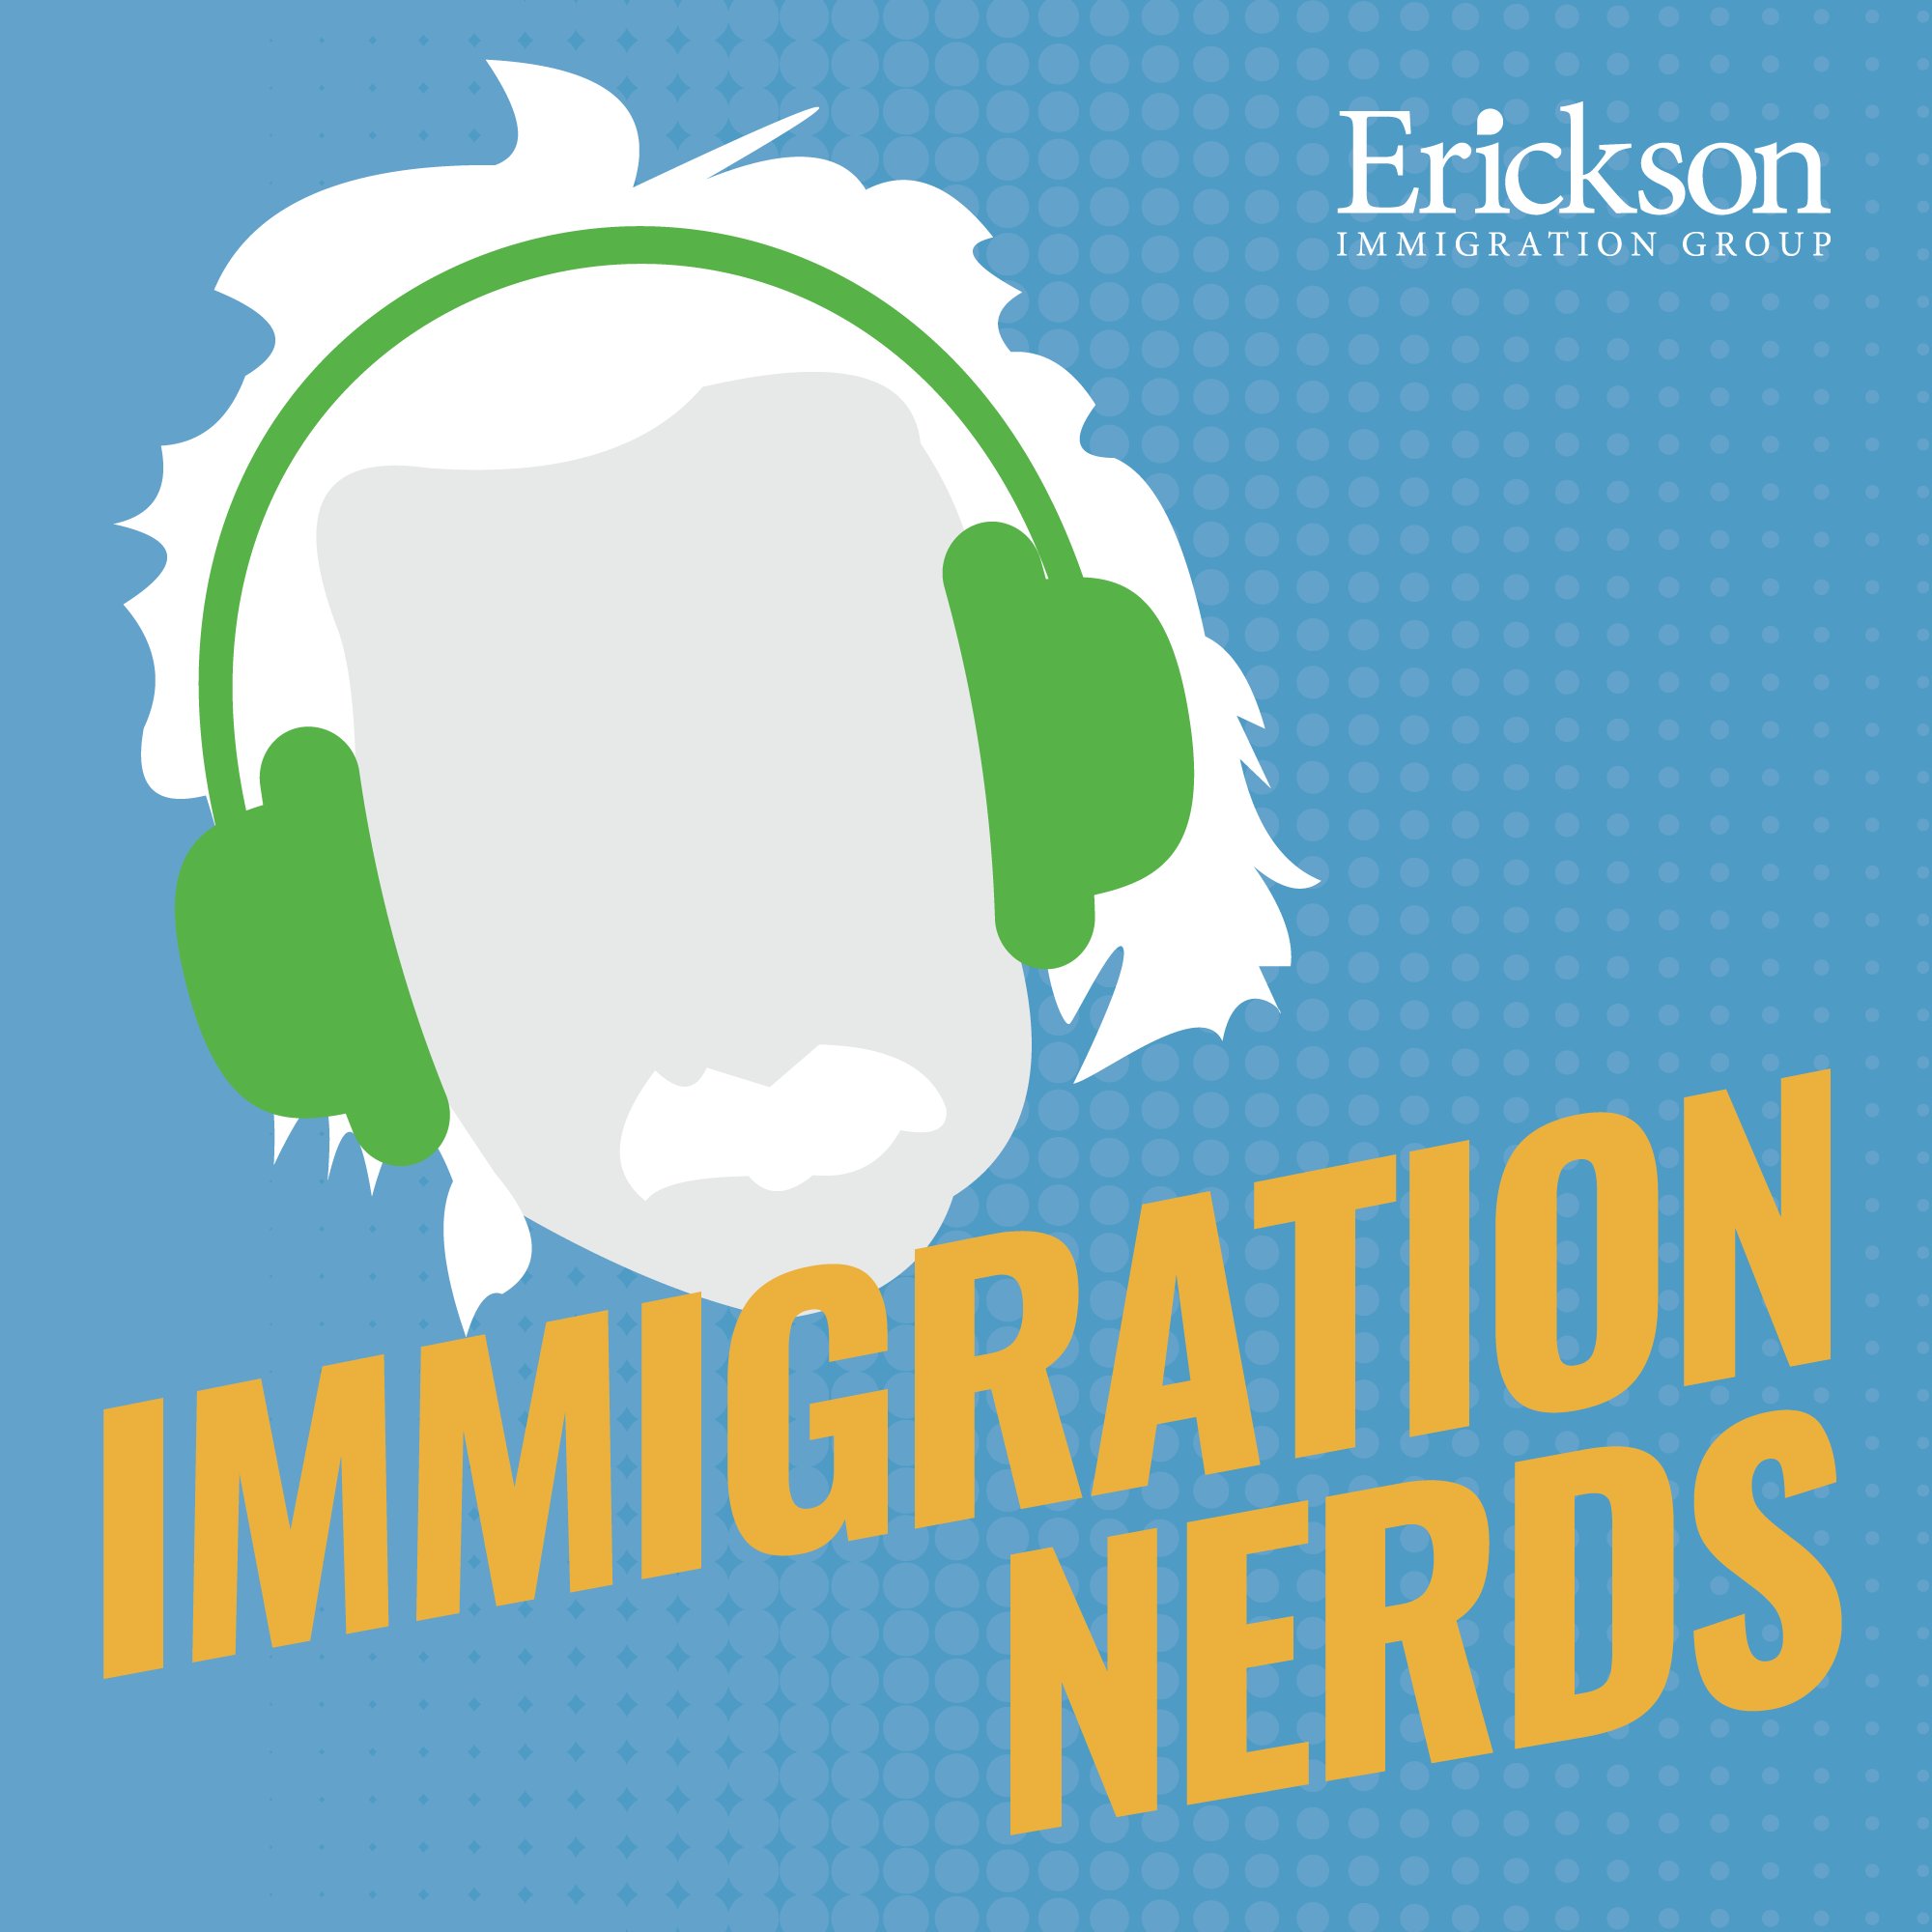 Listen every Thursday for all things Immigration.  Official podcast of Erickson Immigration Group.